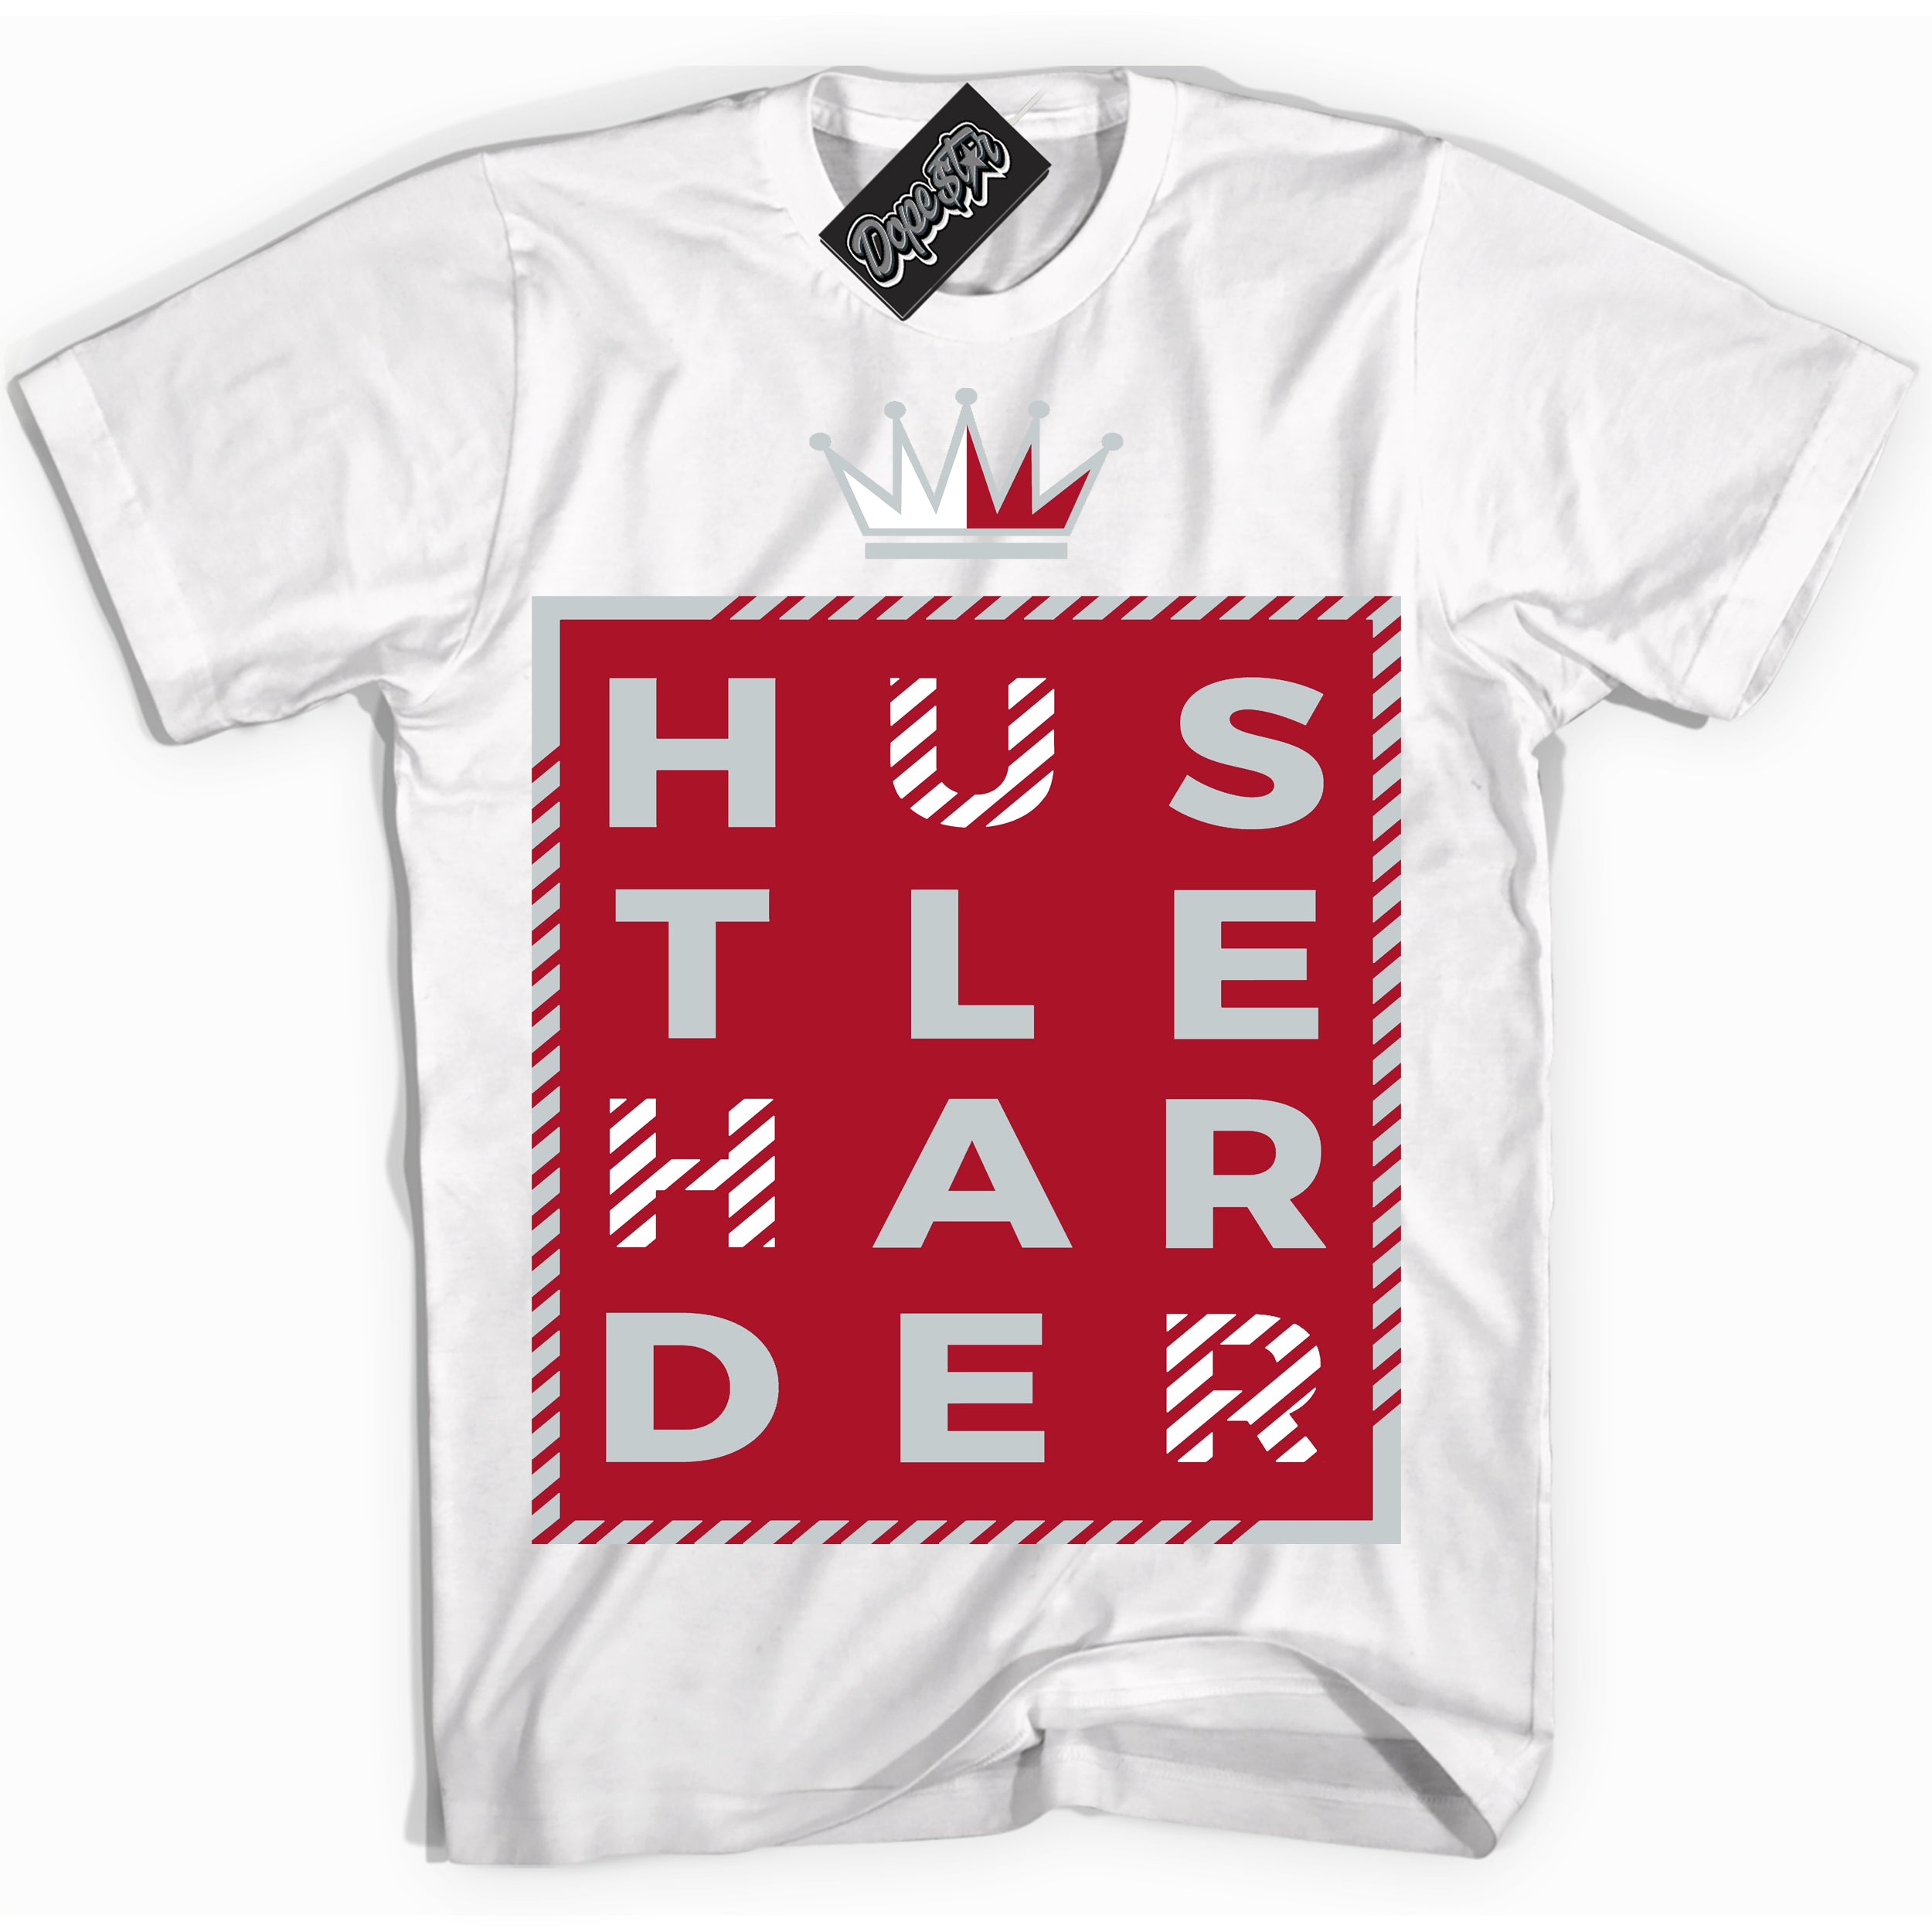 Cool White Shirt with “ Hustle Harder ” design that perfectly matches Reverse Ultraman Sneakers.